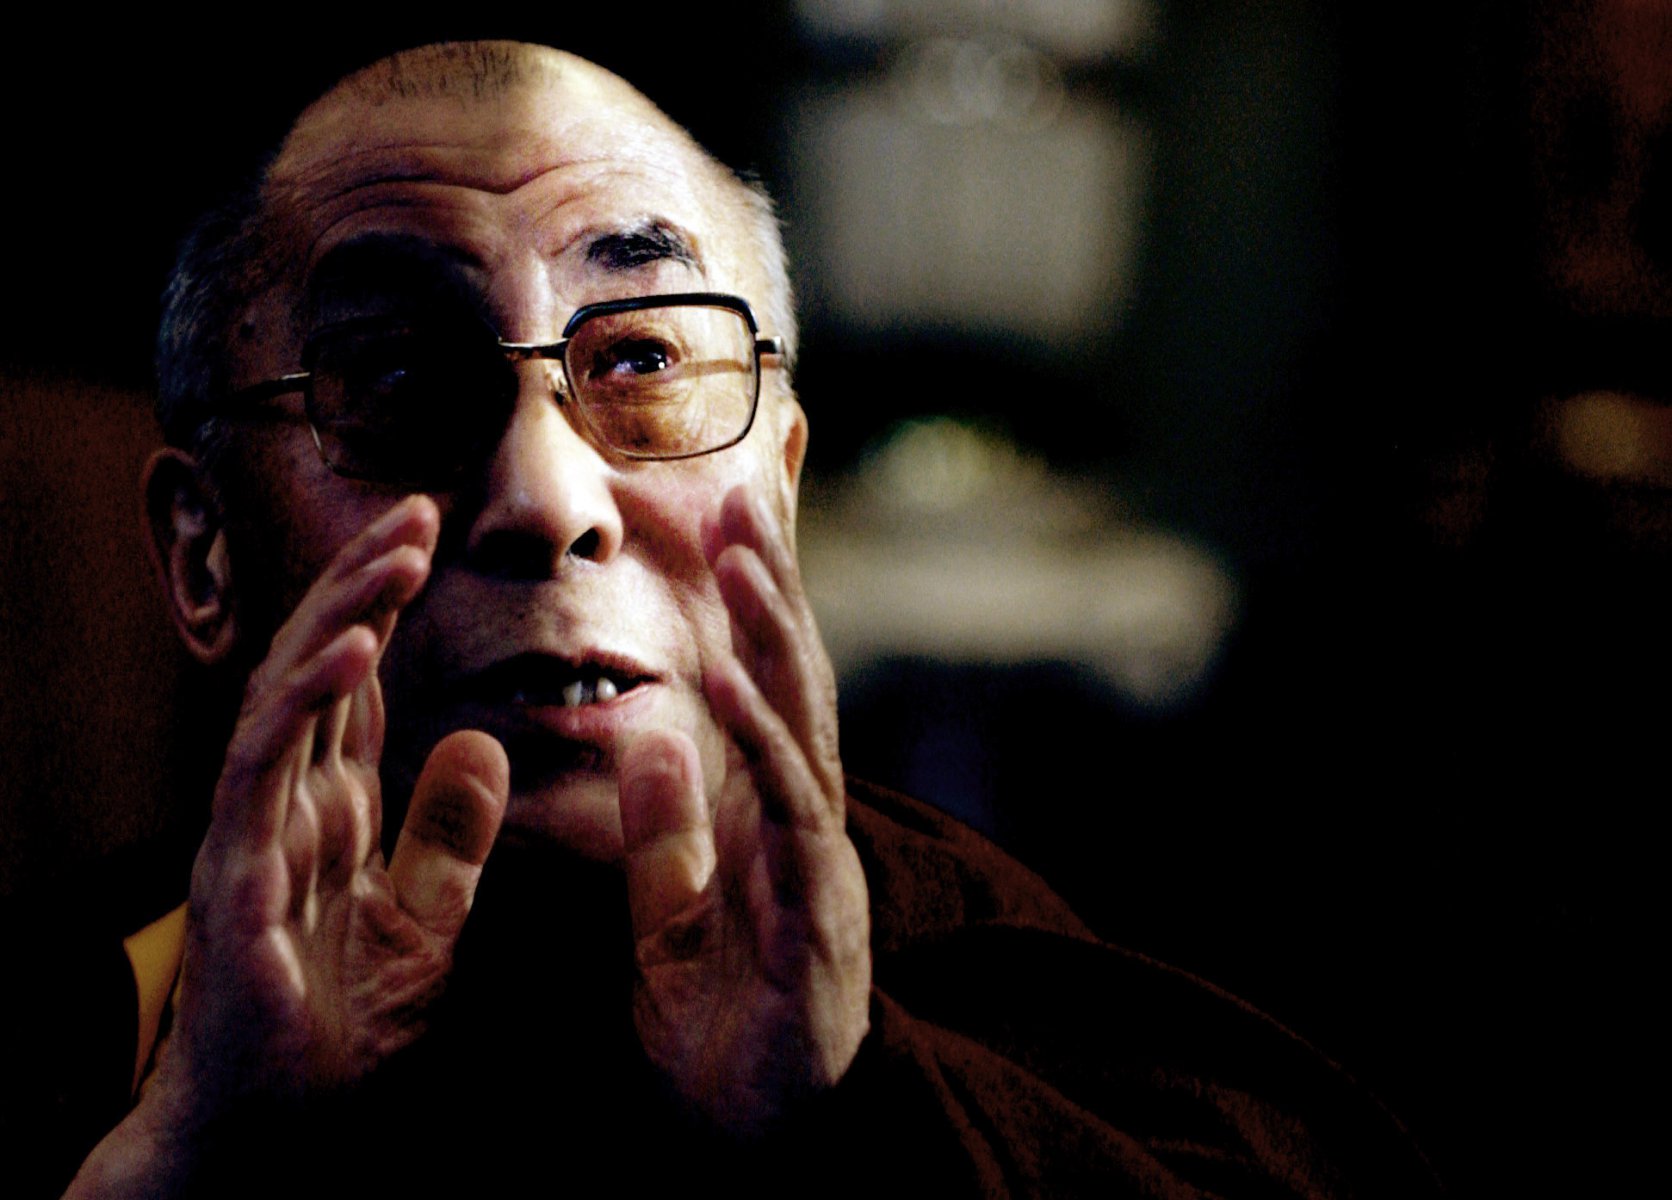 The Dalai Lama pictured at his exile residence in Dharamsala, India, while discussing political Topics with western visitors. Photo: Boris Roessler/dpa